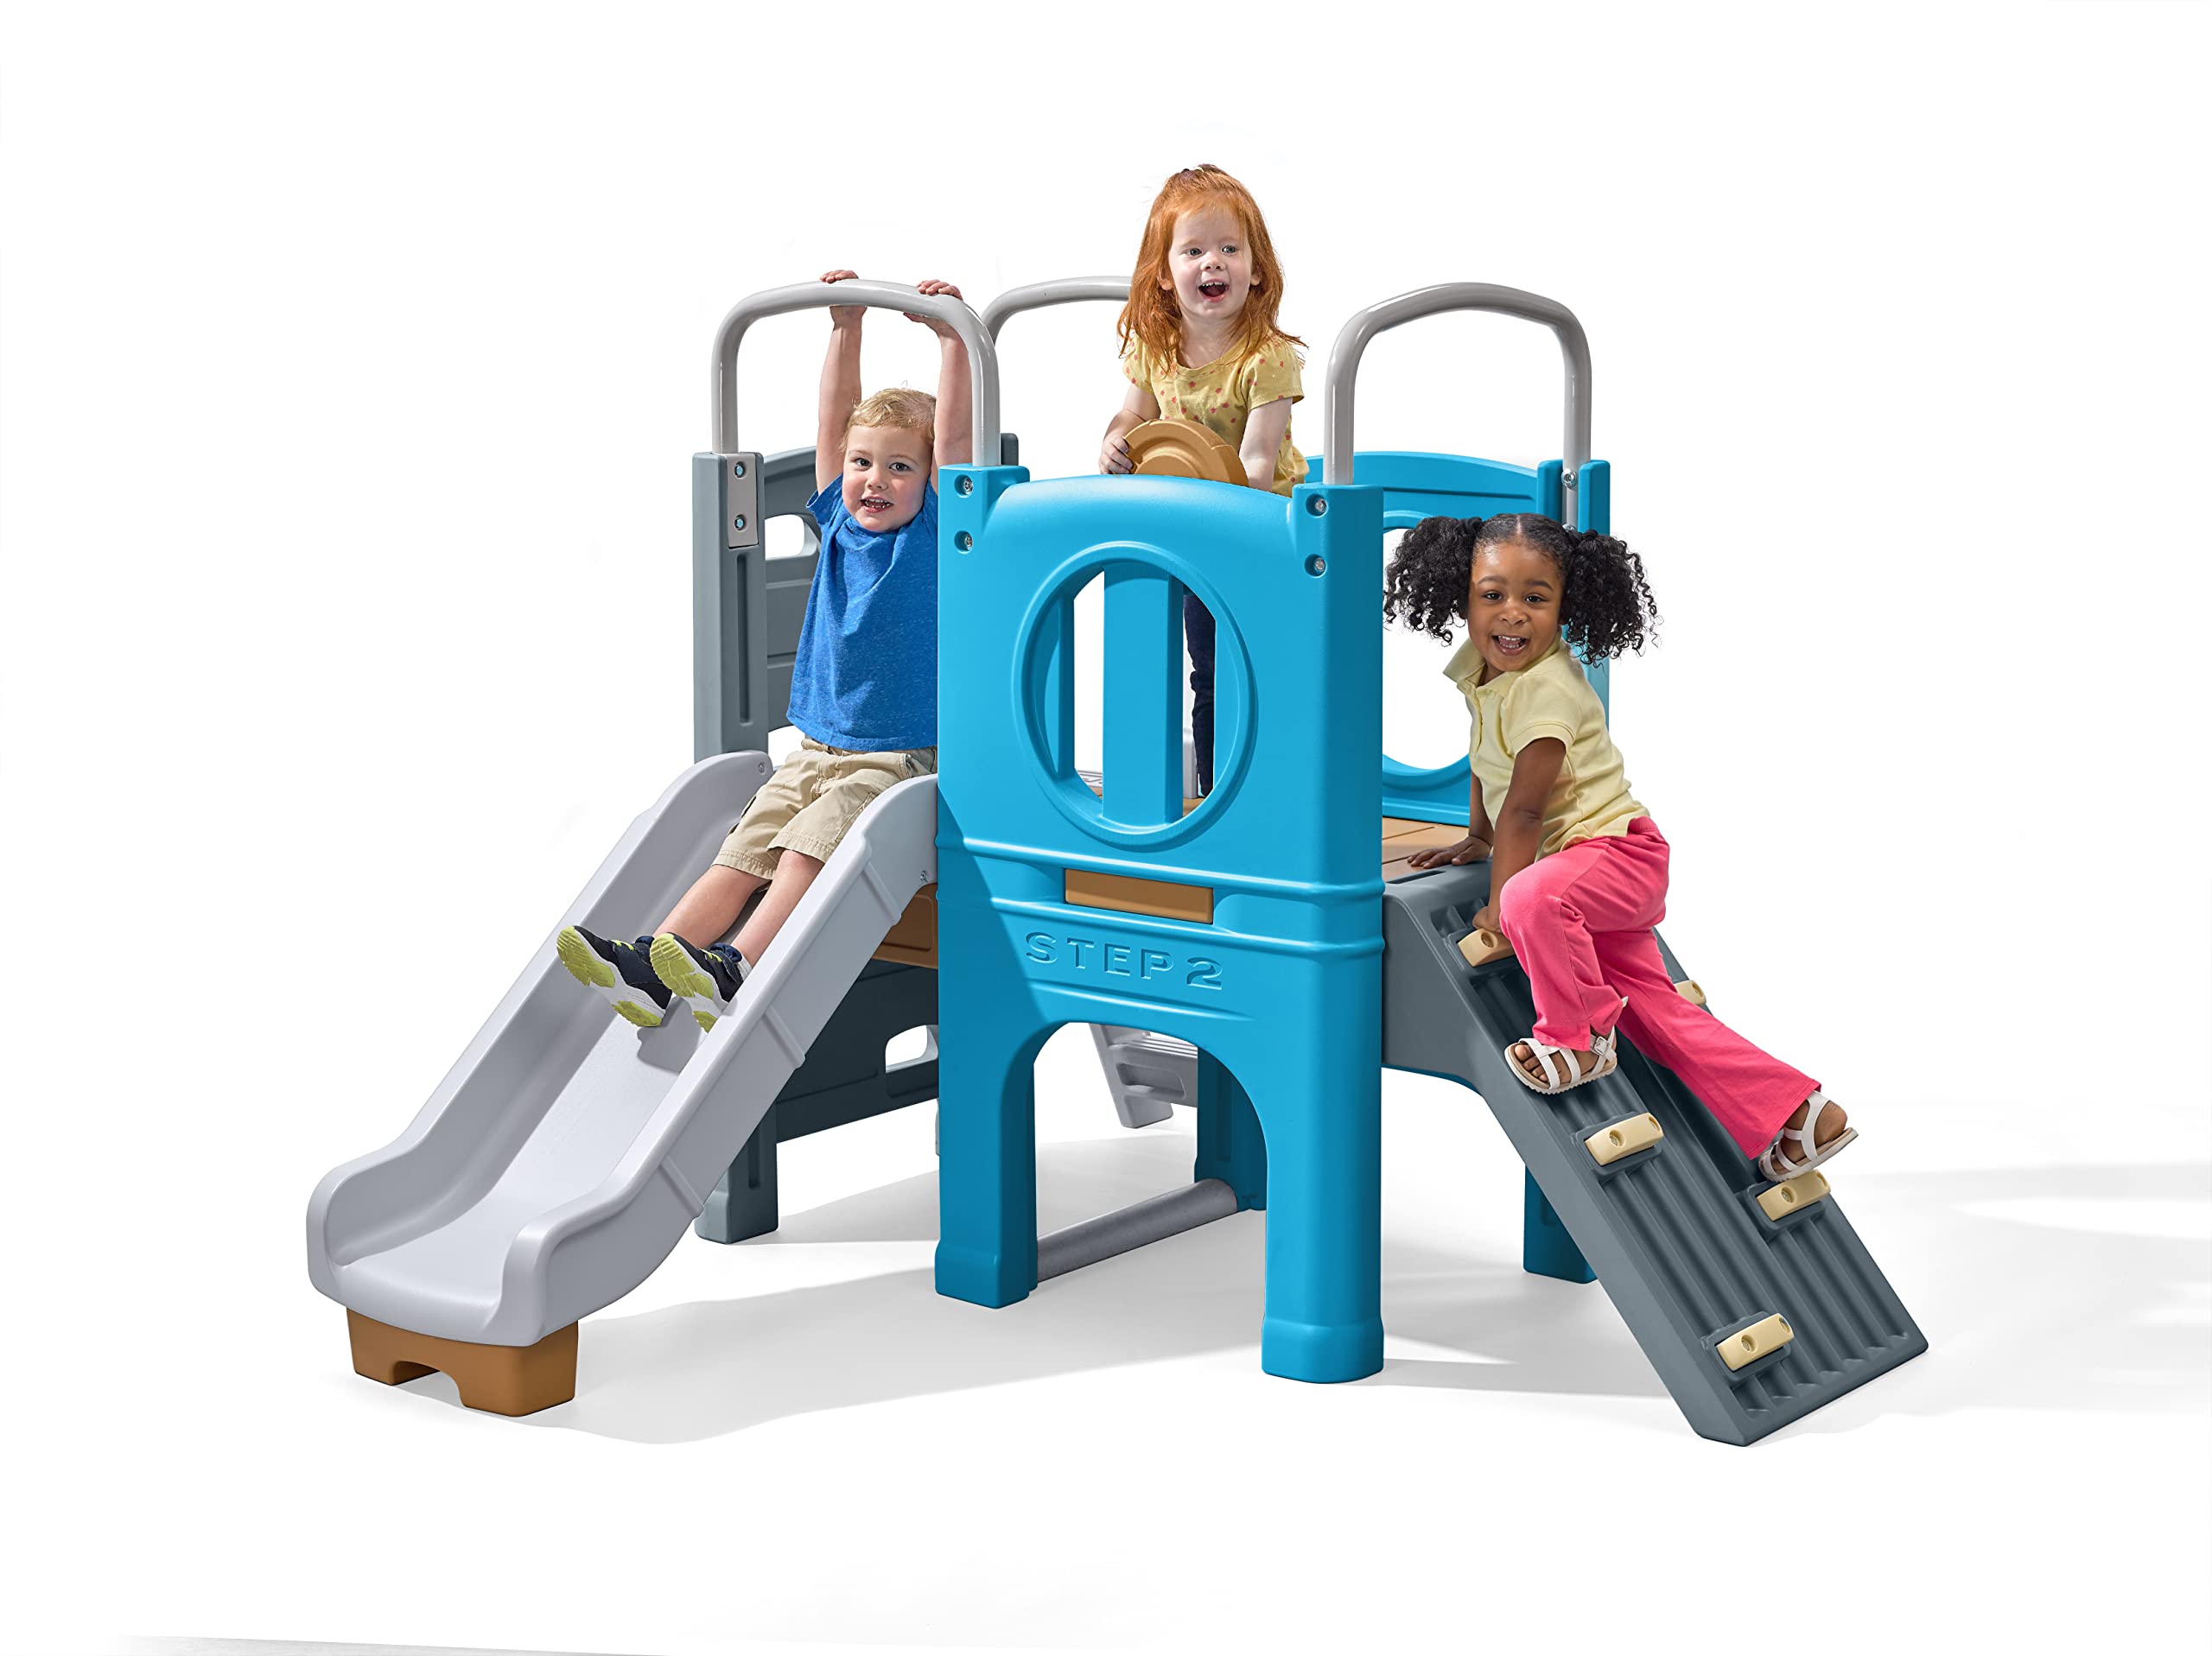 Step2 Scout & Slide Climber Toddler Playset – Toddler Play Gym with Elevated Kids Playhouse, Kids Slide, Two Climbing Walls, Steering Wheel, and Metal Bars – Dimensions 72.5